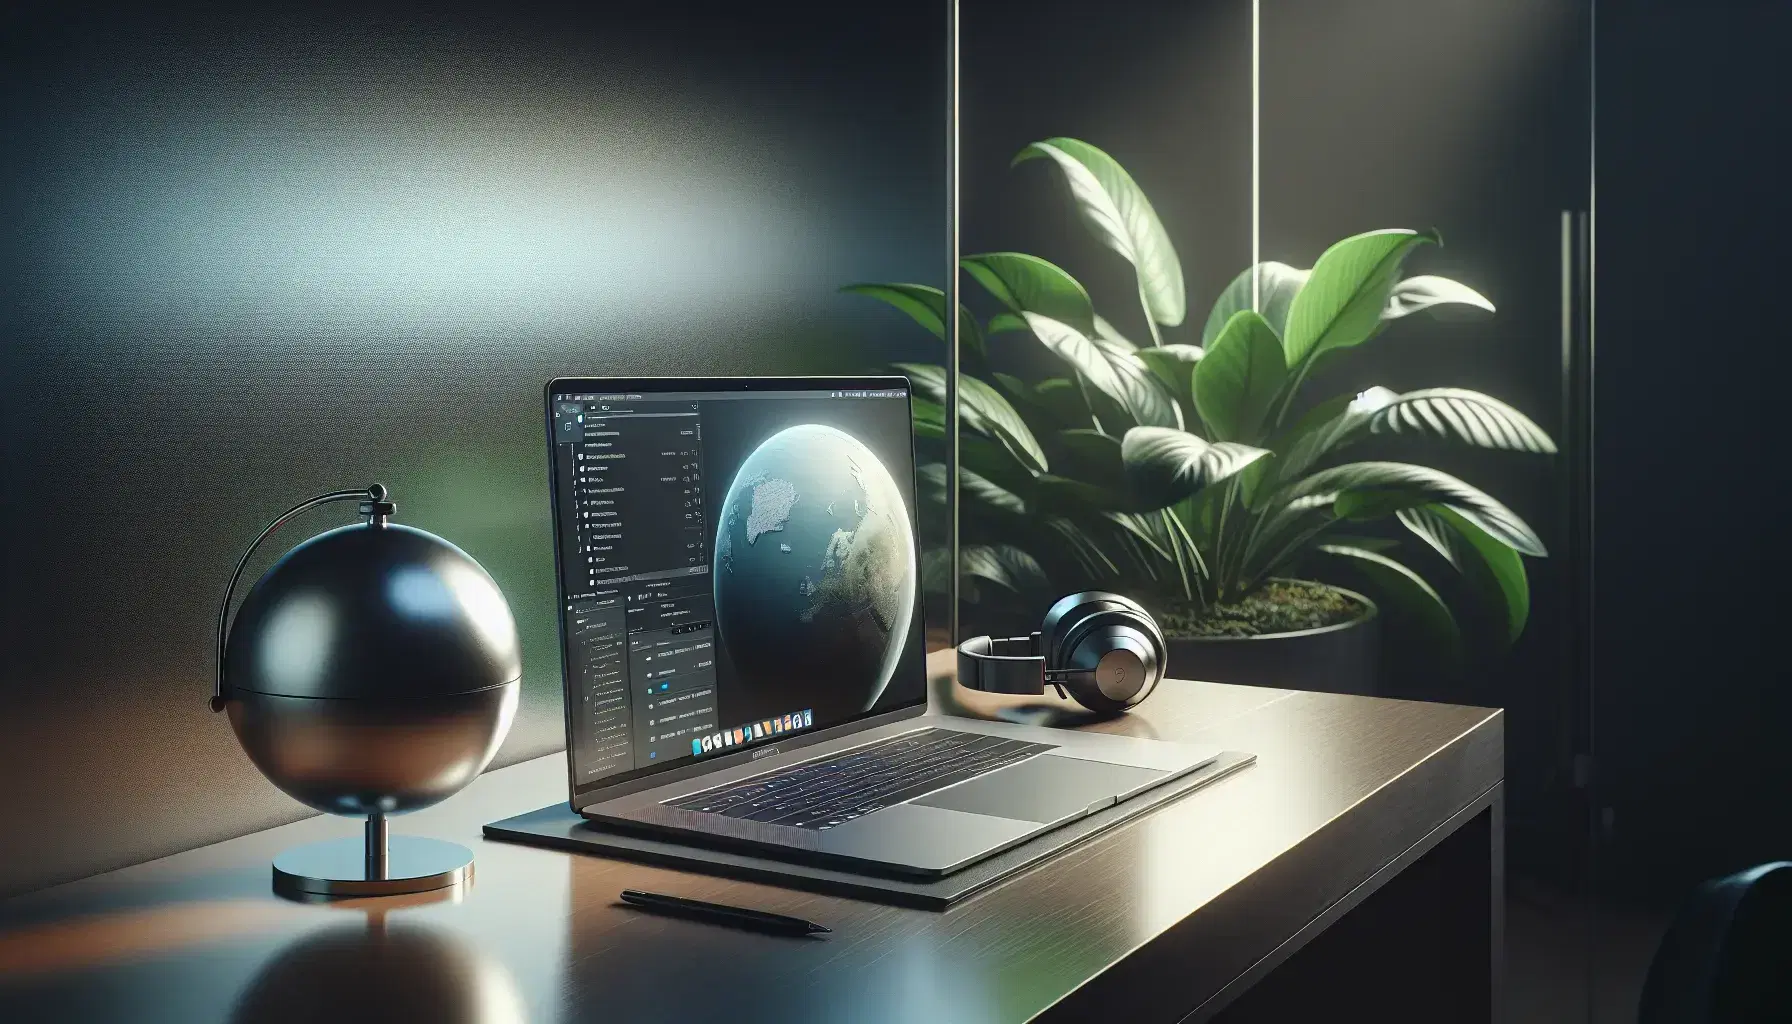 Modern silver laptop on wooden desk with green plant, stylized globe and connected black headphones, in calm environment.